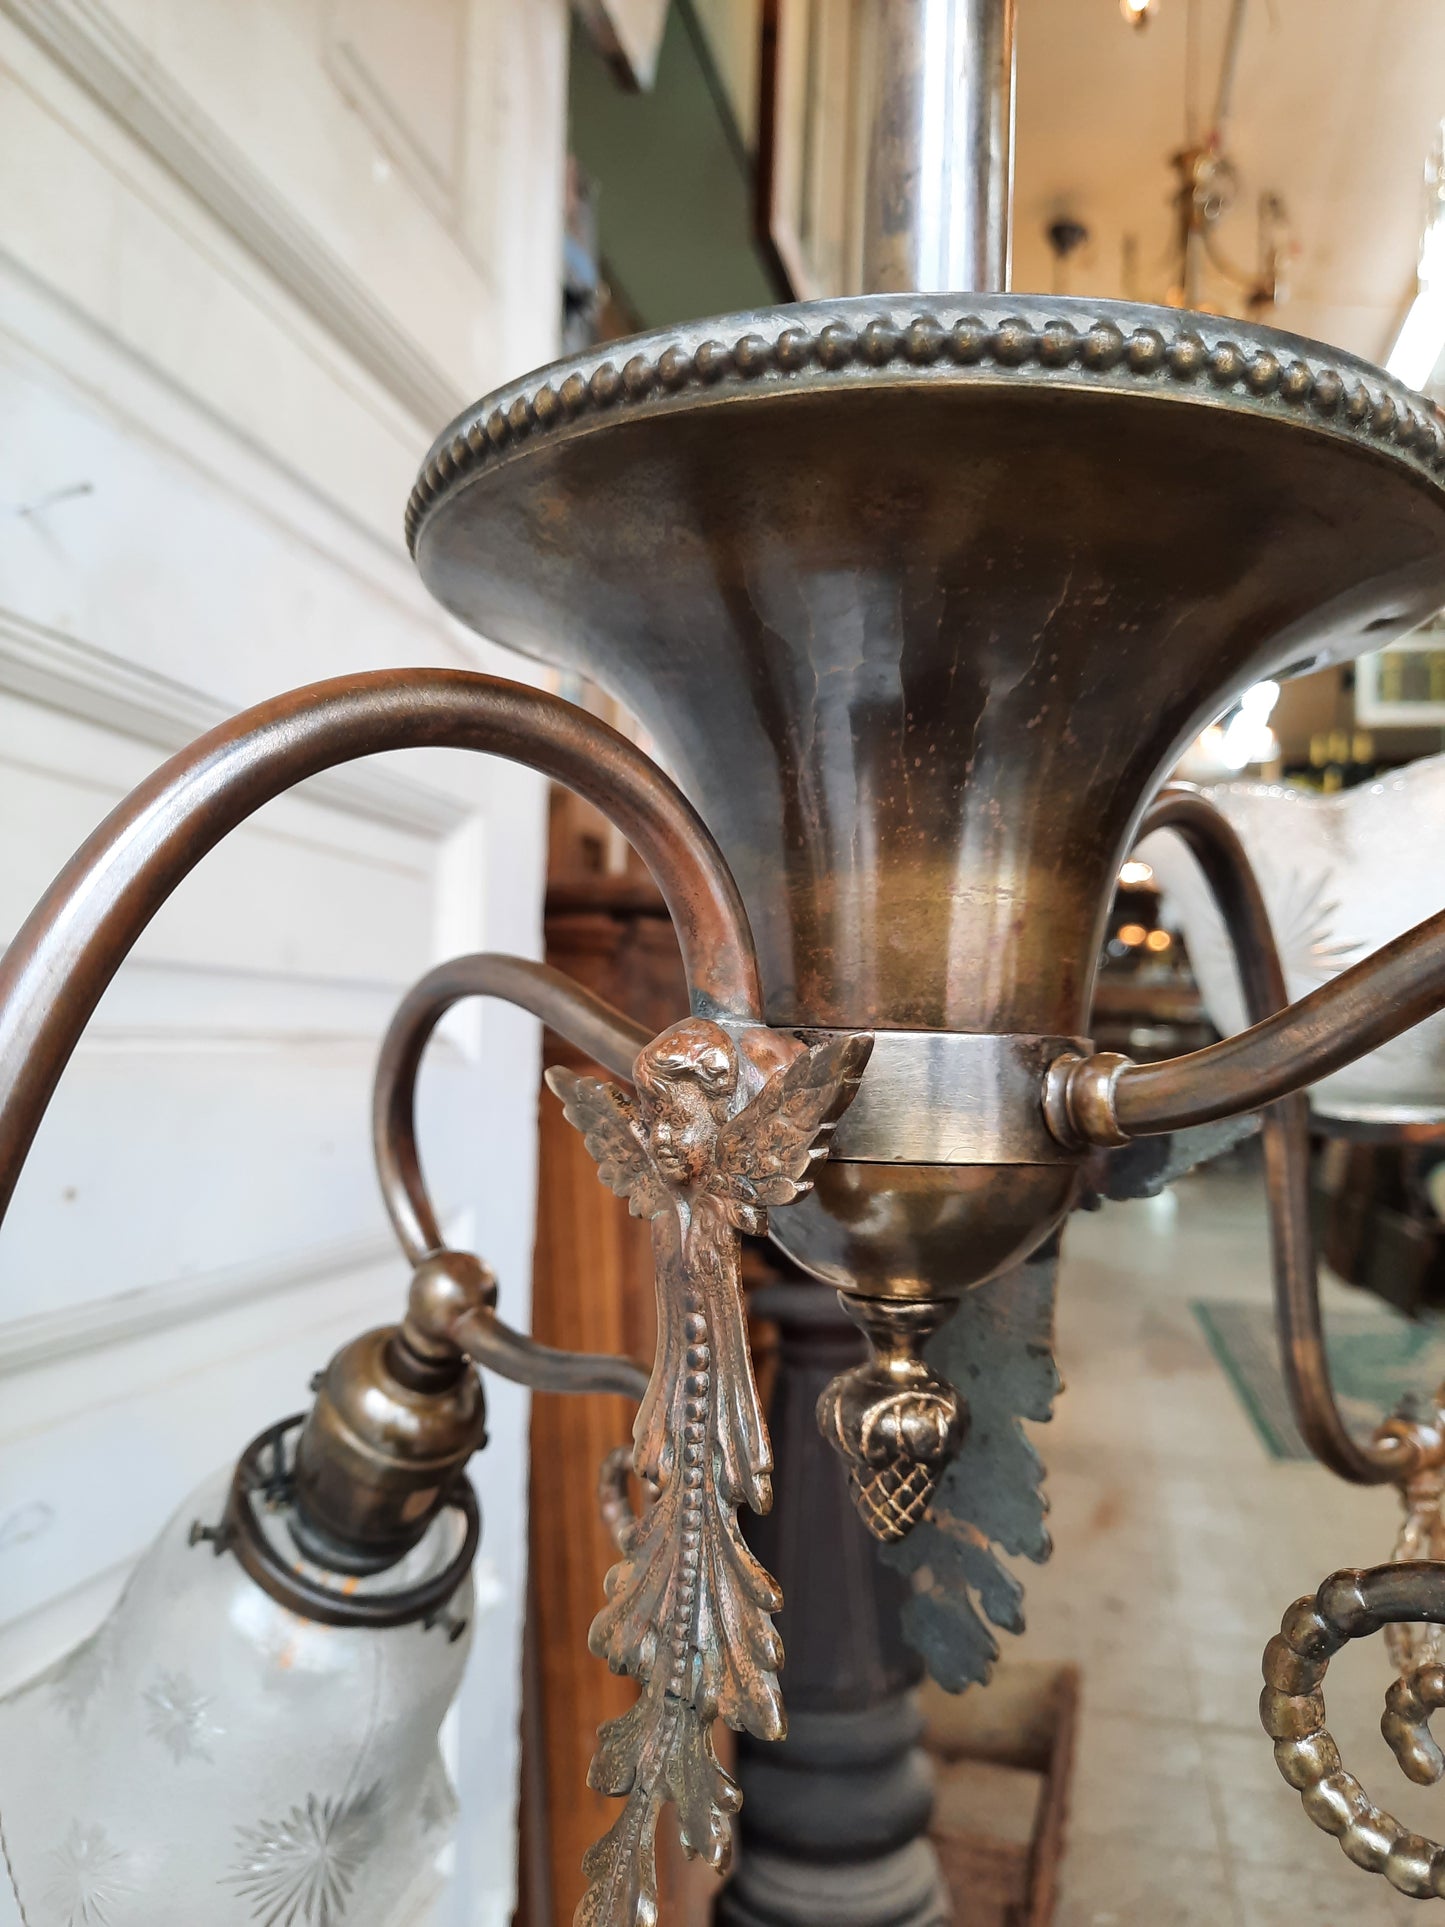 Converted Gas and Electric Antique Chandelier with Cherub Faces, Victorian Era Brass Gasolier Light